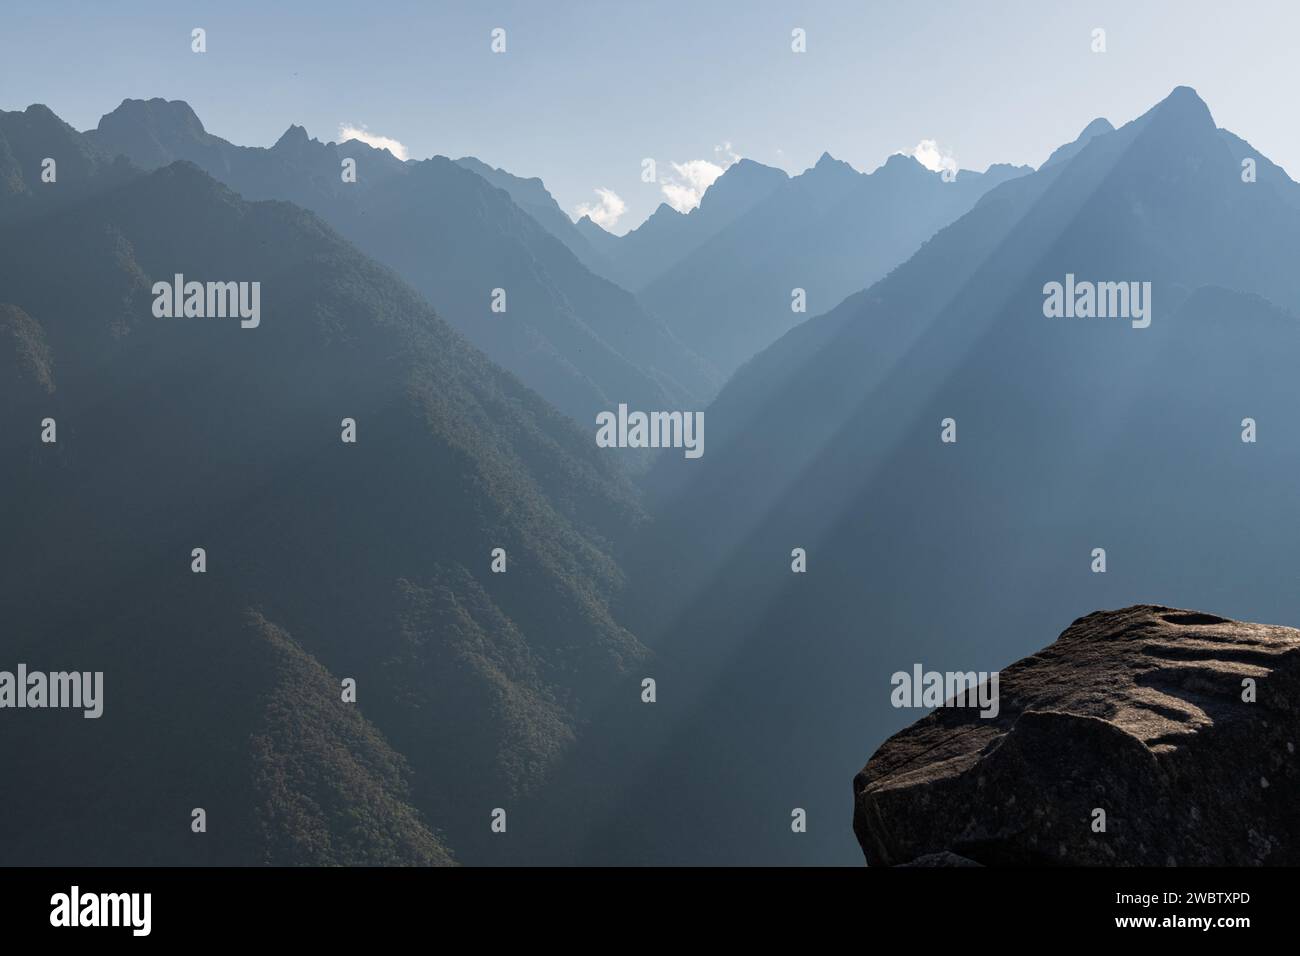 A view from the Machu Picchu citadel ruins of the Sacred Valley mountains in Peru Stock Photo